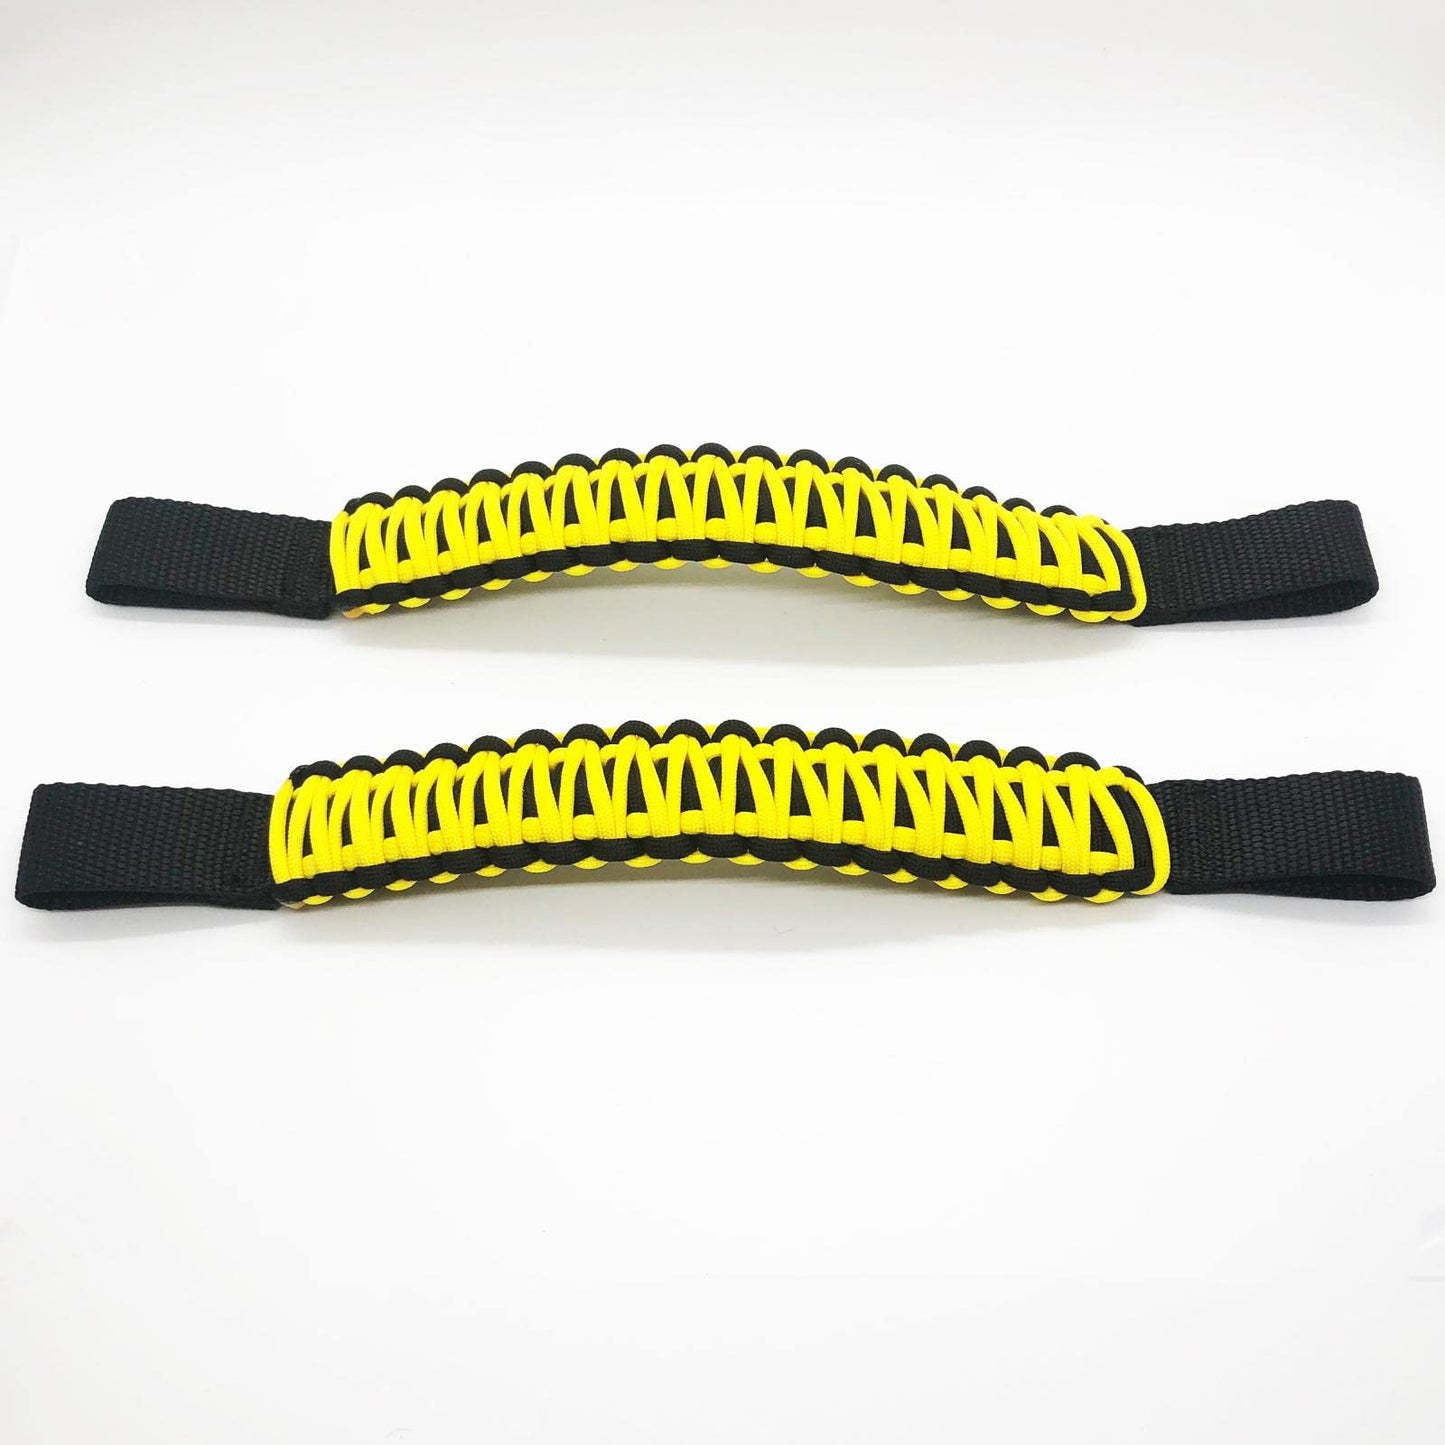 Bartact Paracord Grab Handle - Headrest - (Sold as Pair) - Black/Yellow